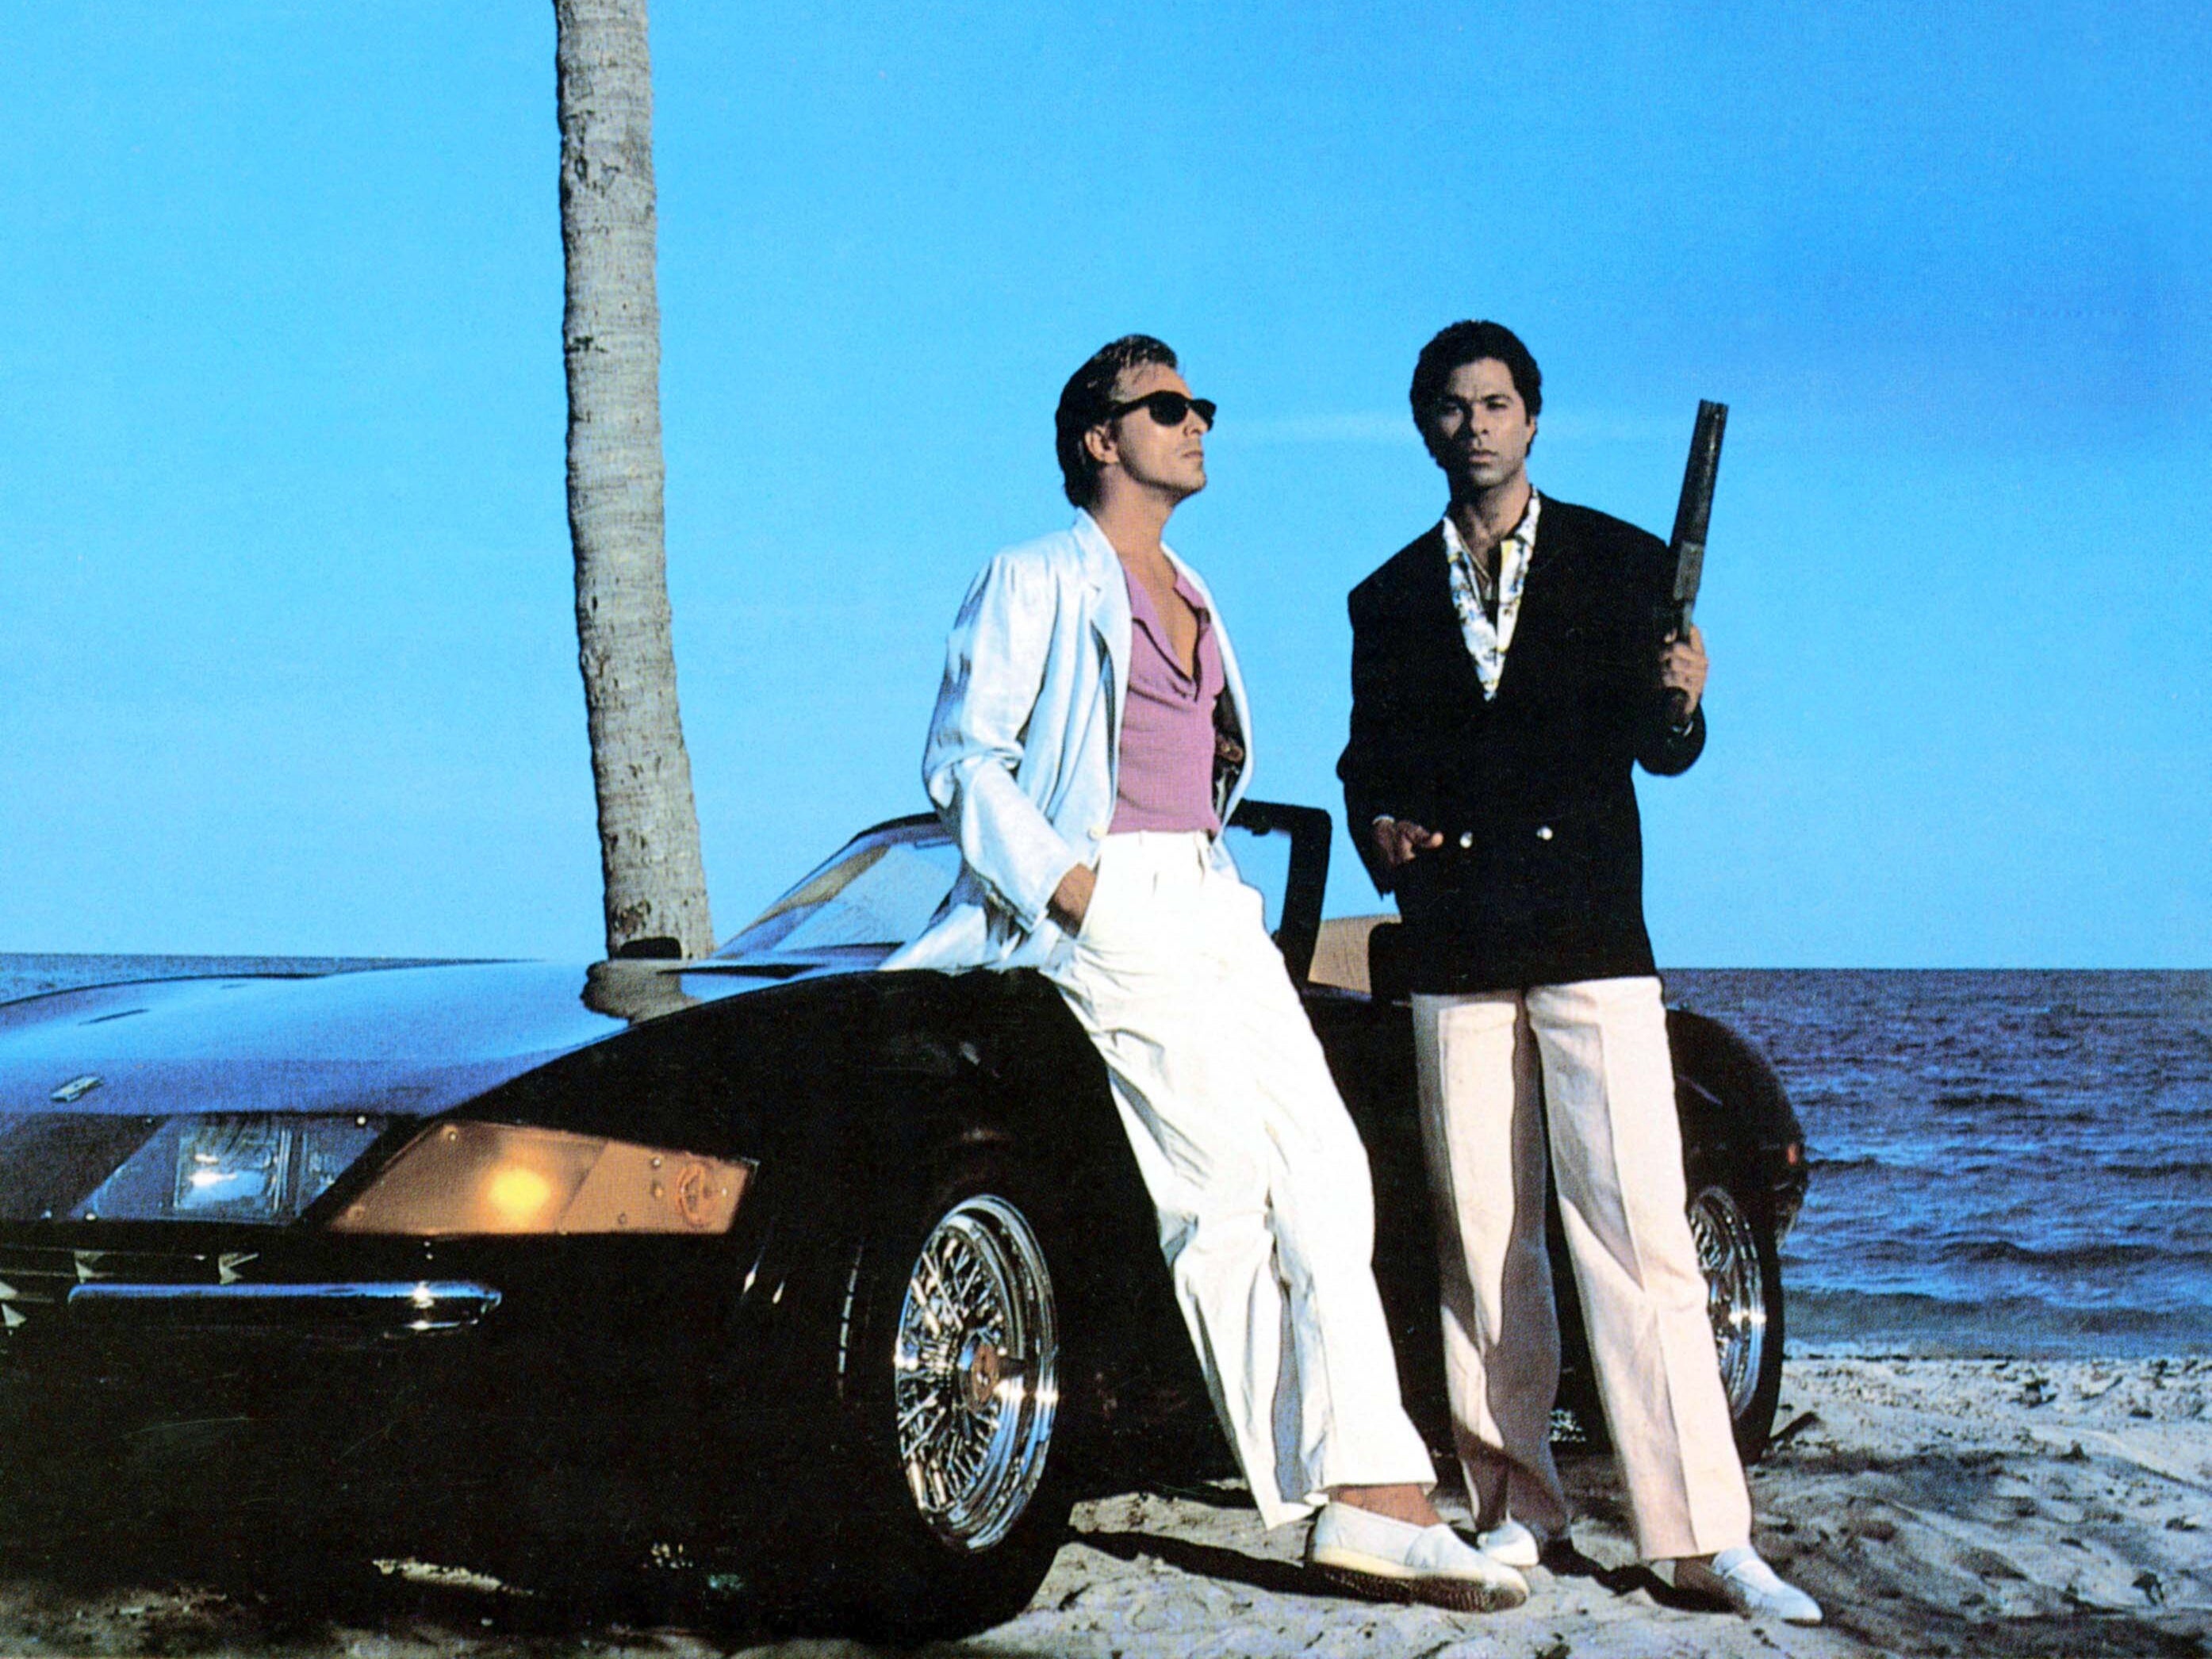 Executive producer Michael Mann hand-picked the ‘Miami Vice’ wardrobe, famously decreeing: ‘No earth tones’